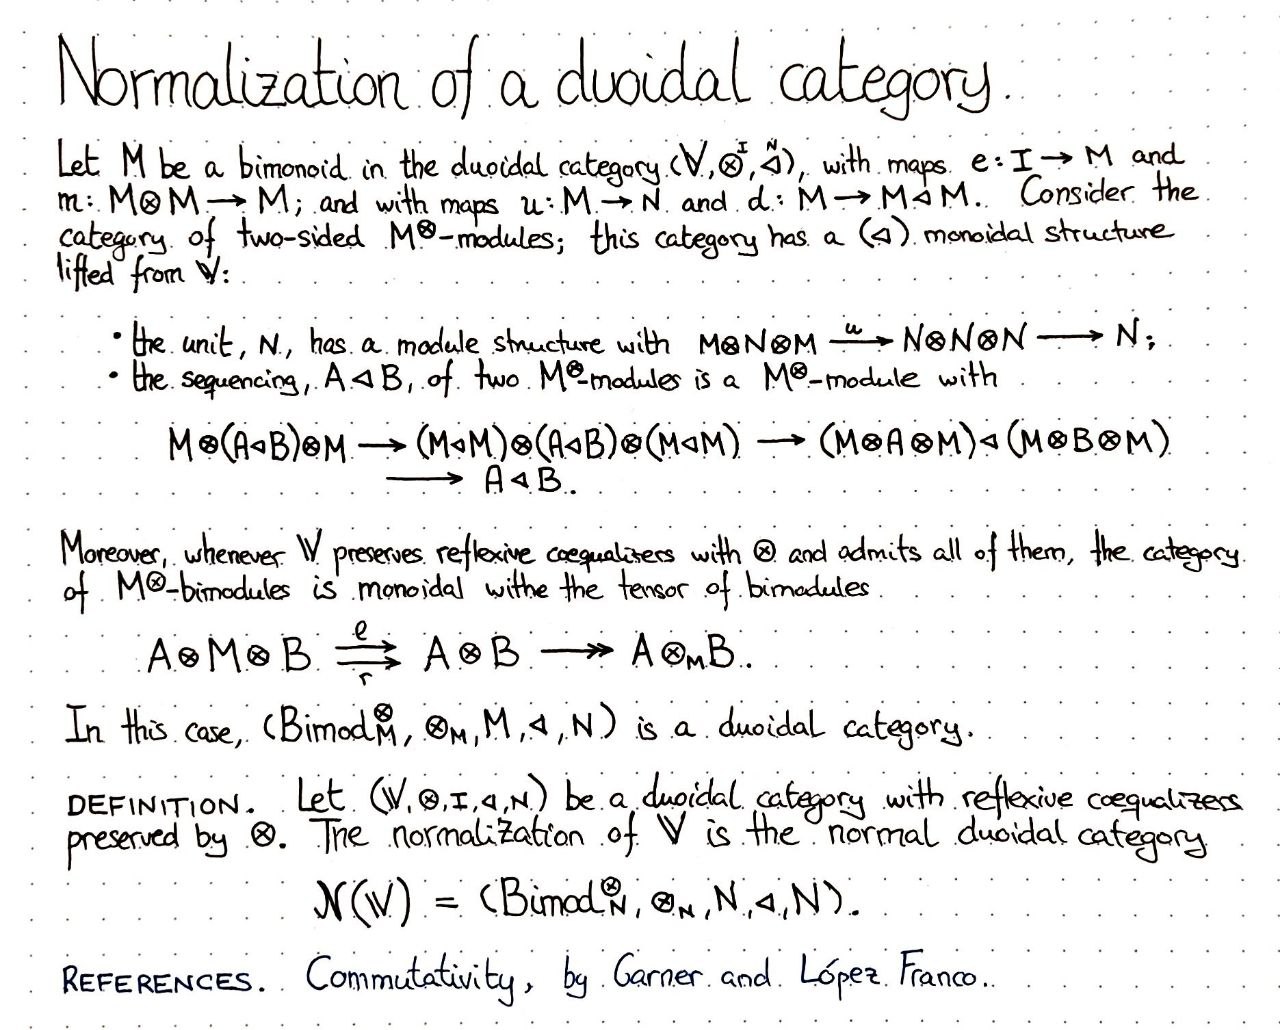 normalization-of-a-duoidal-category